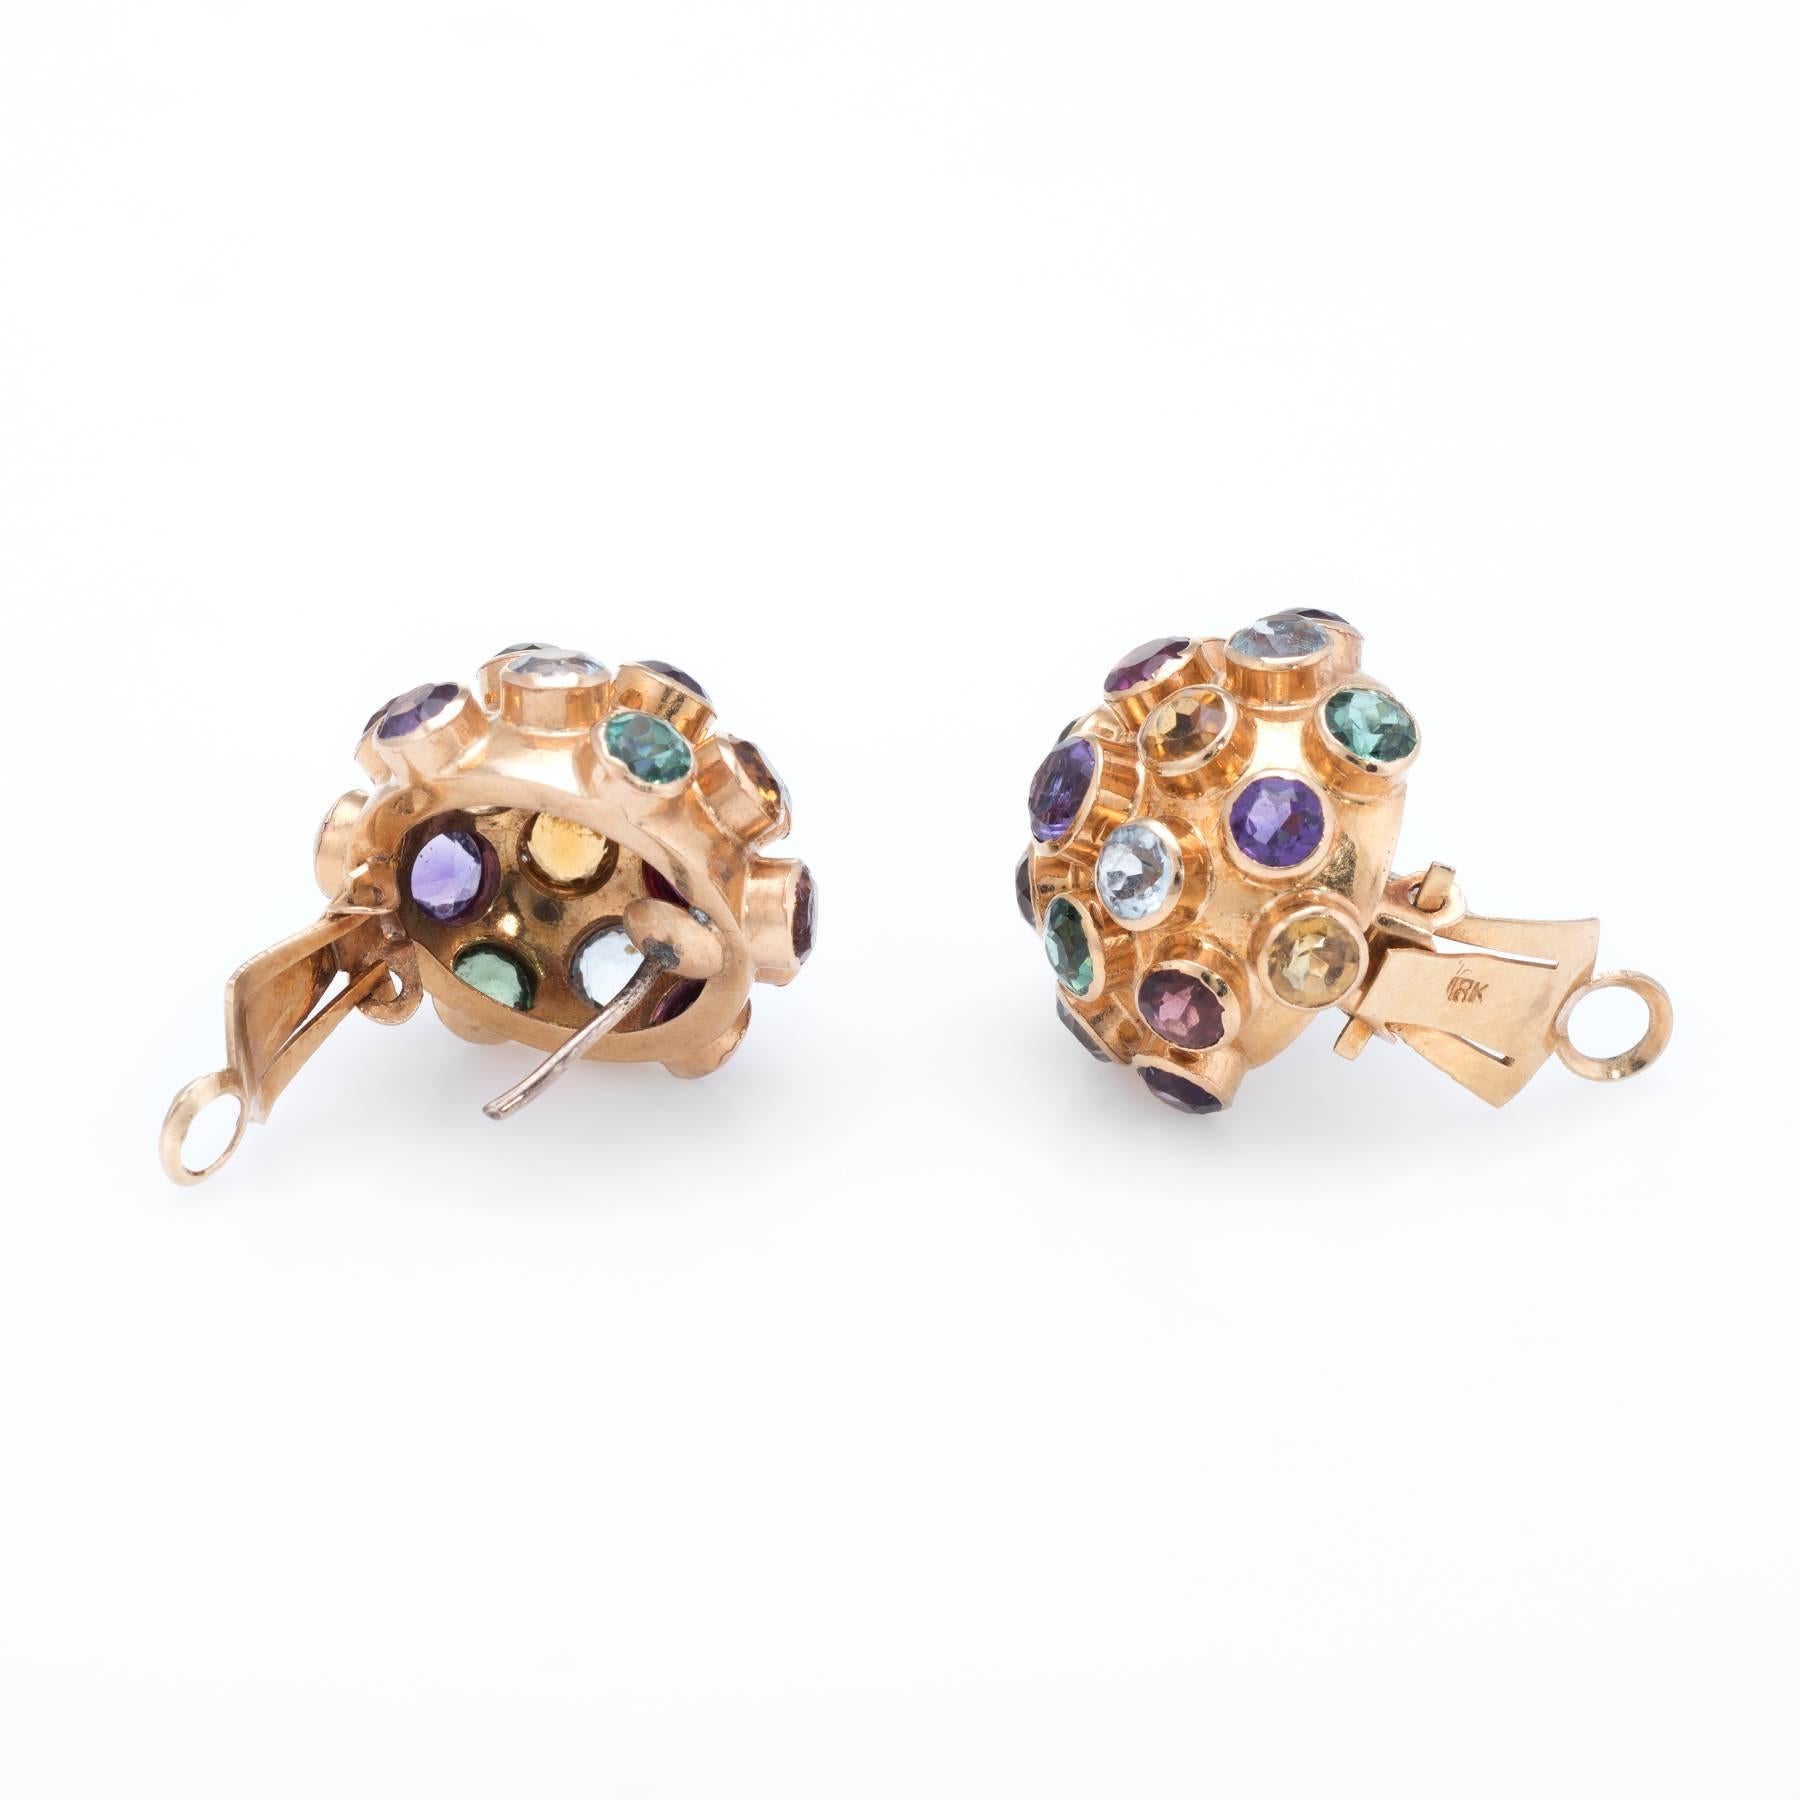 Ornate dome sputnik gemstone earrings, crafted in 18 karat rose gold. 

Gemstones (blue topaz, amethyst, aquamarine, pink & green tourmaline, citrine and garnet) total an estimated 4.50 carats. The gemstones are in excellent condition and free of